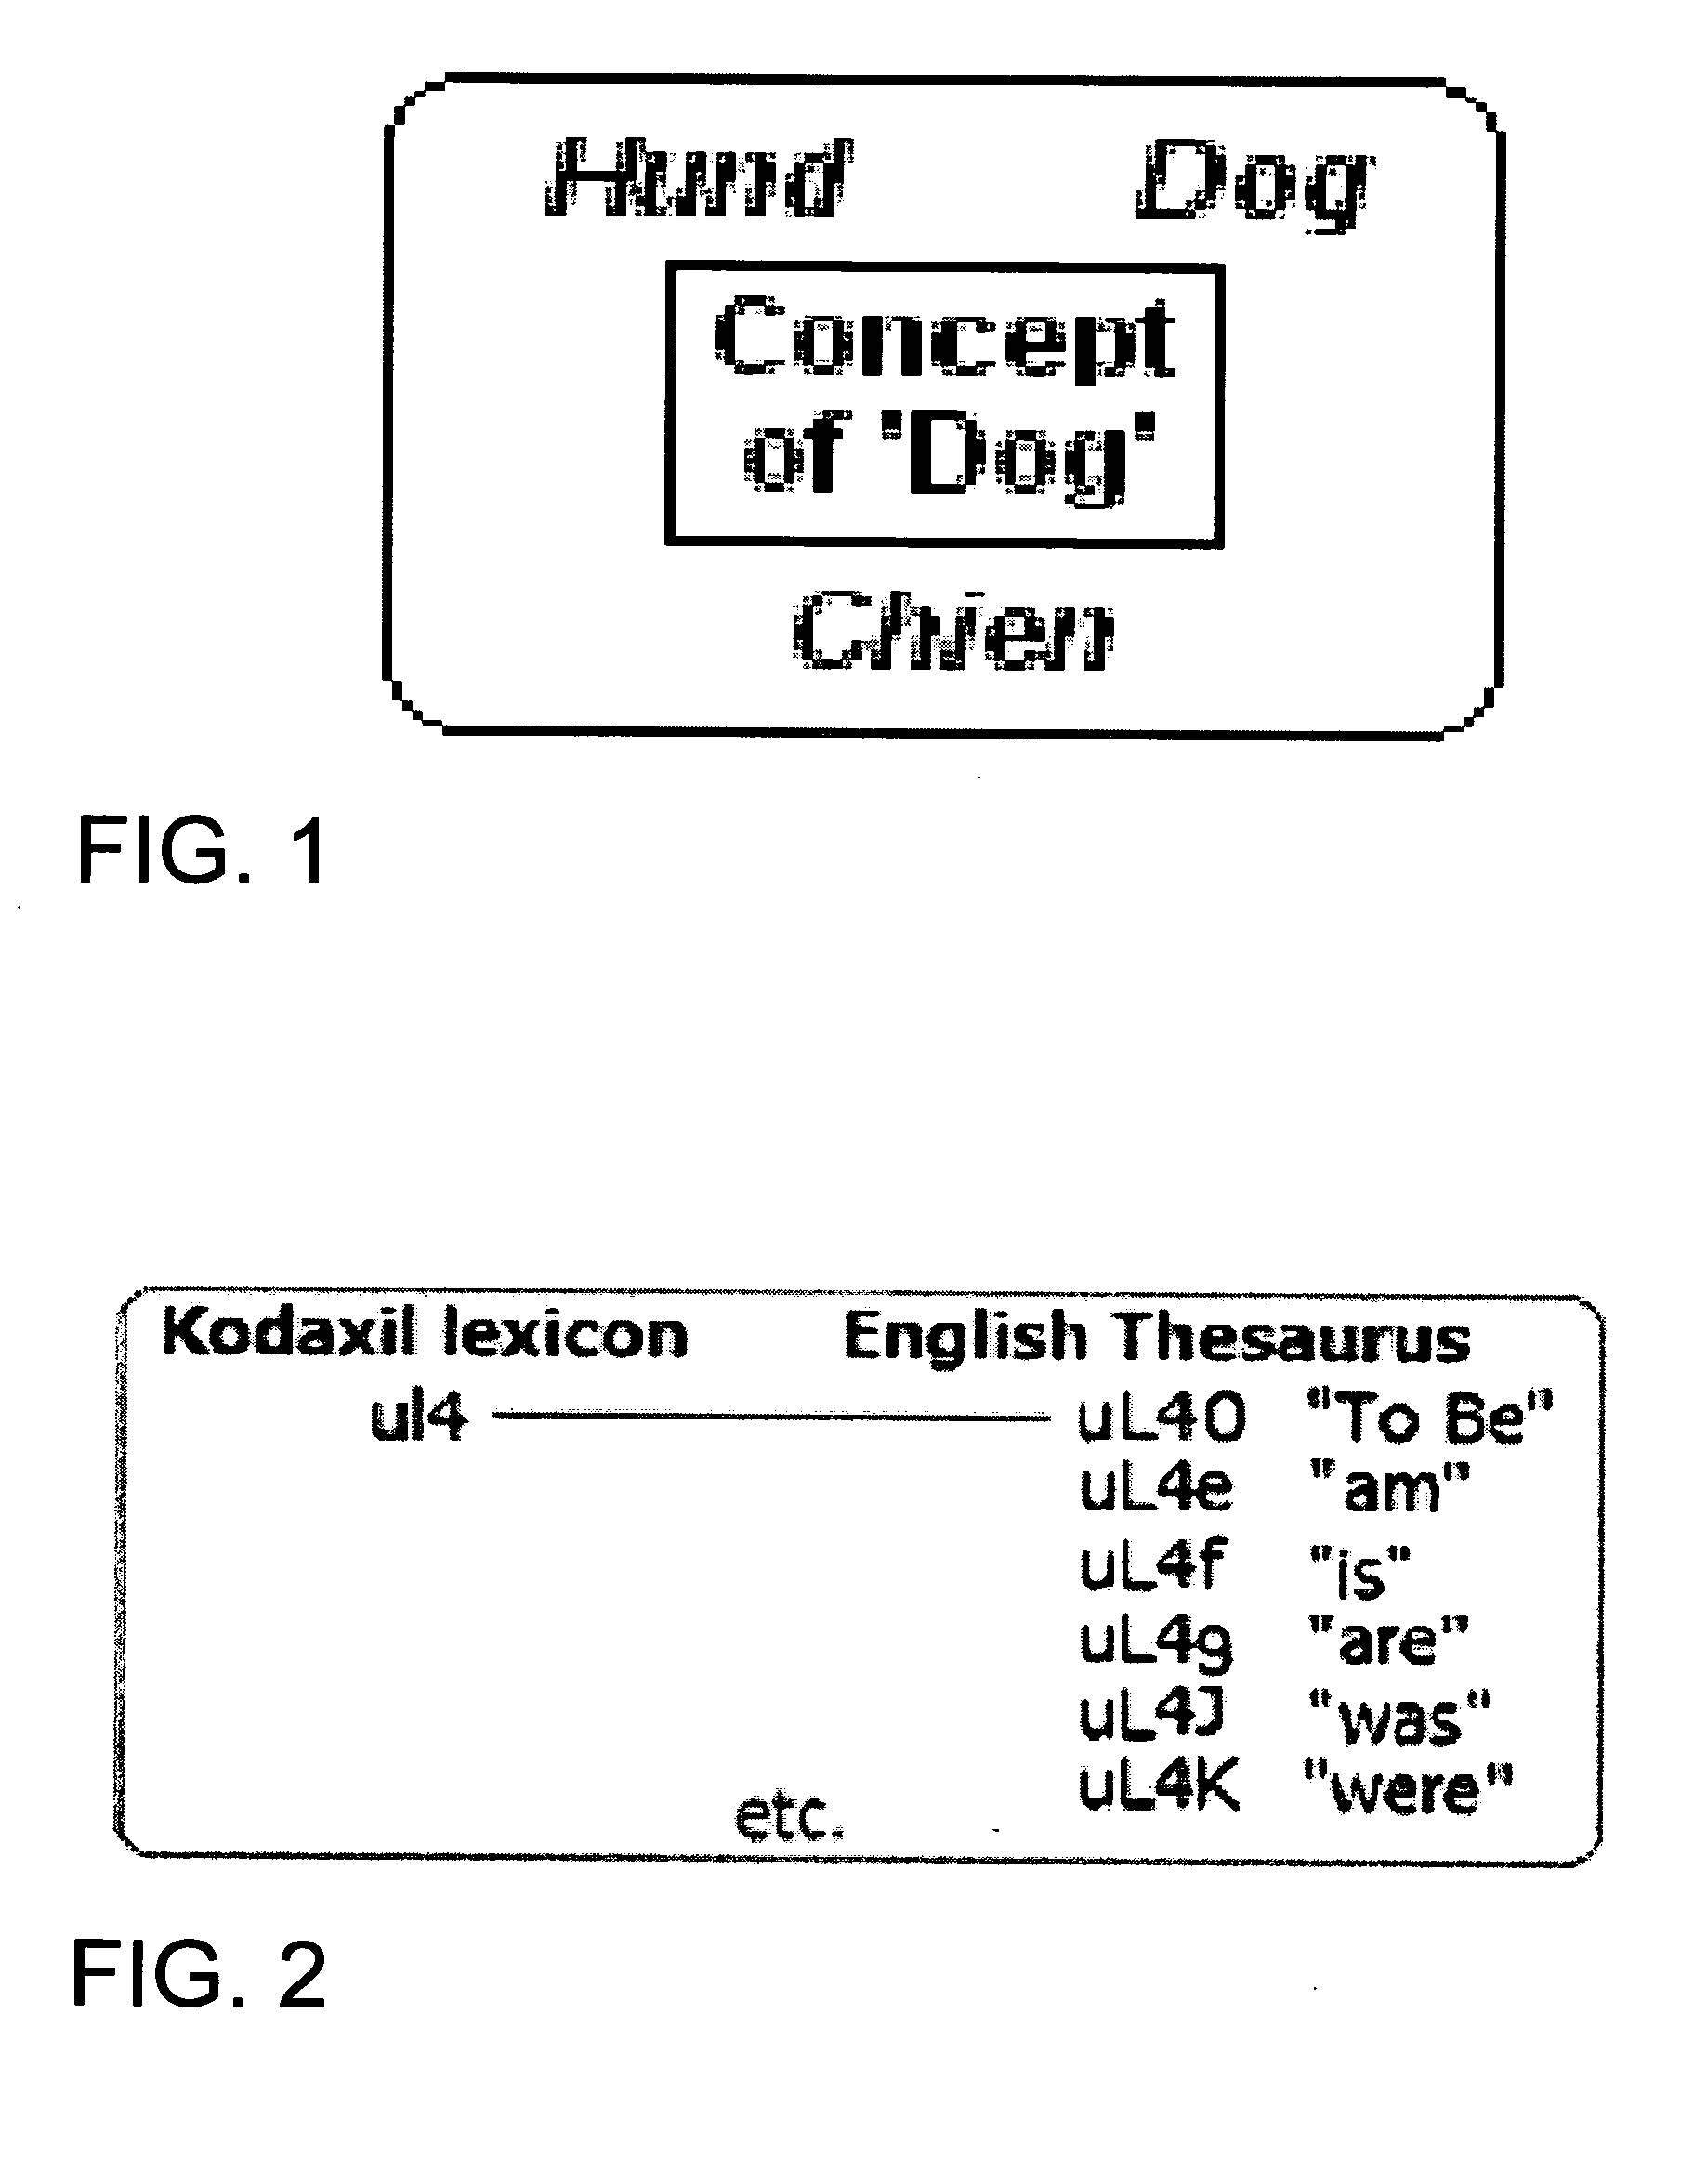 Machine-processable global knowledge representation system and method using an extensible markup language consisting of natural language-independent BASE64-encoded words